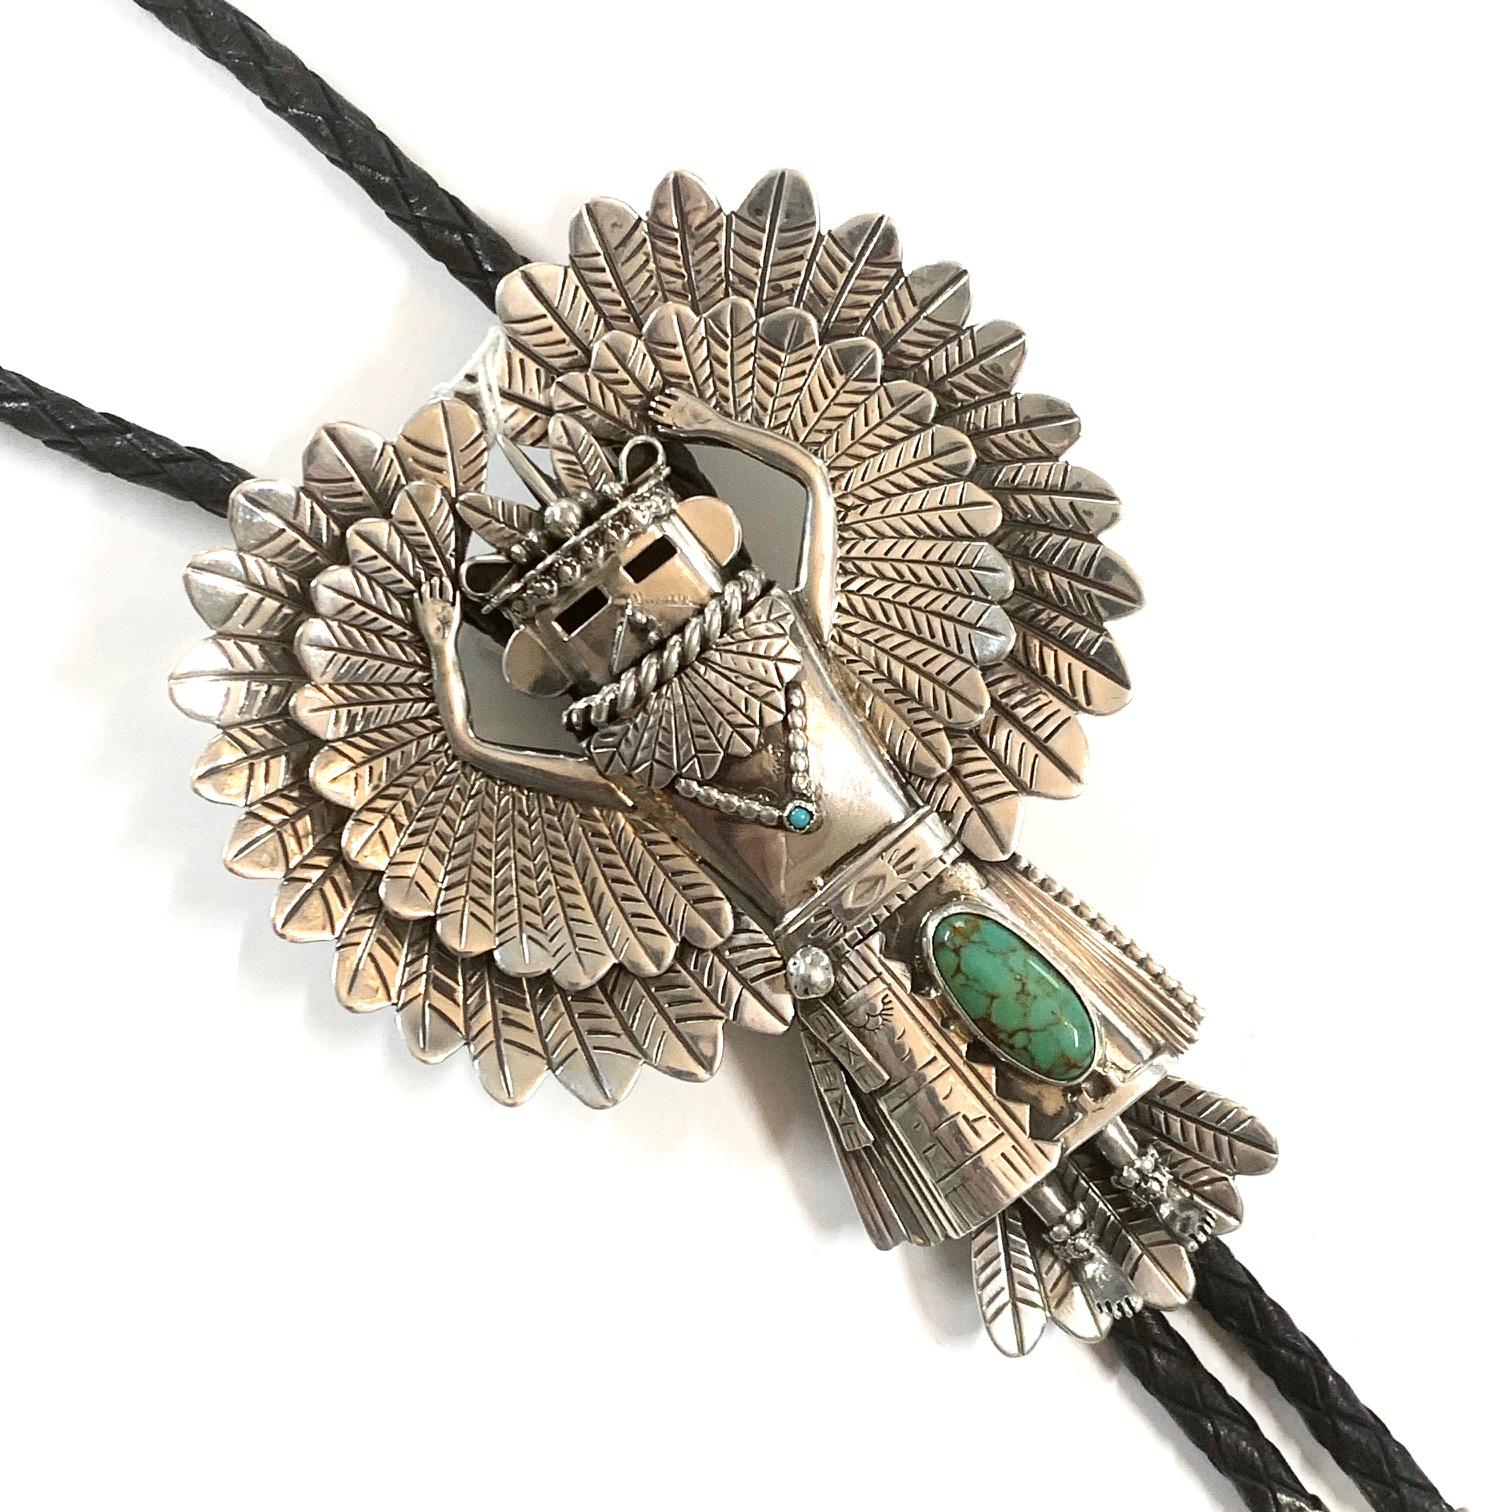 G.G. Navajo Sterling Turquoise Bolo Estate CCBOLO13

G.G. is one of the most prestigious Artisans in the Navajo Tribe.... since the early 80s he became well known among his peers he specialized in the most important motives of art, This American